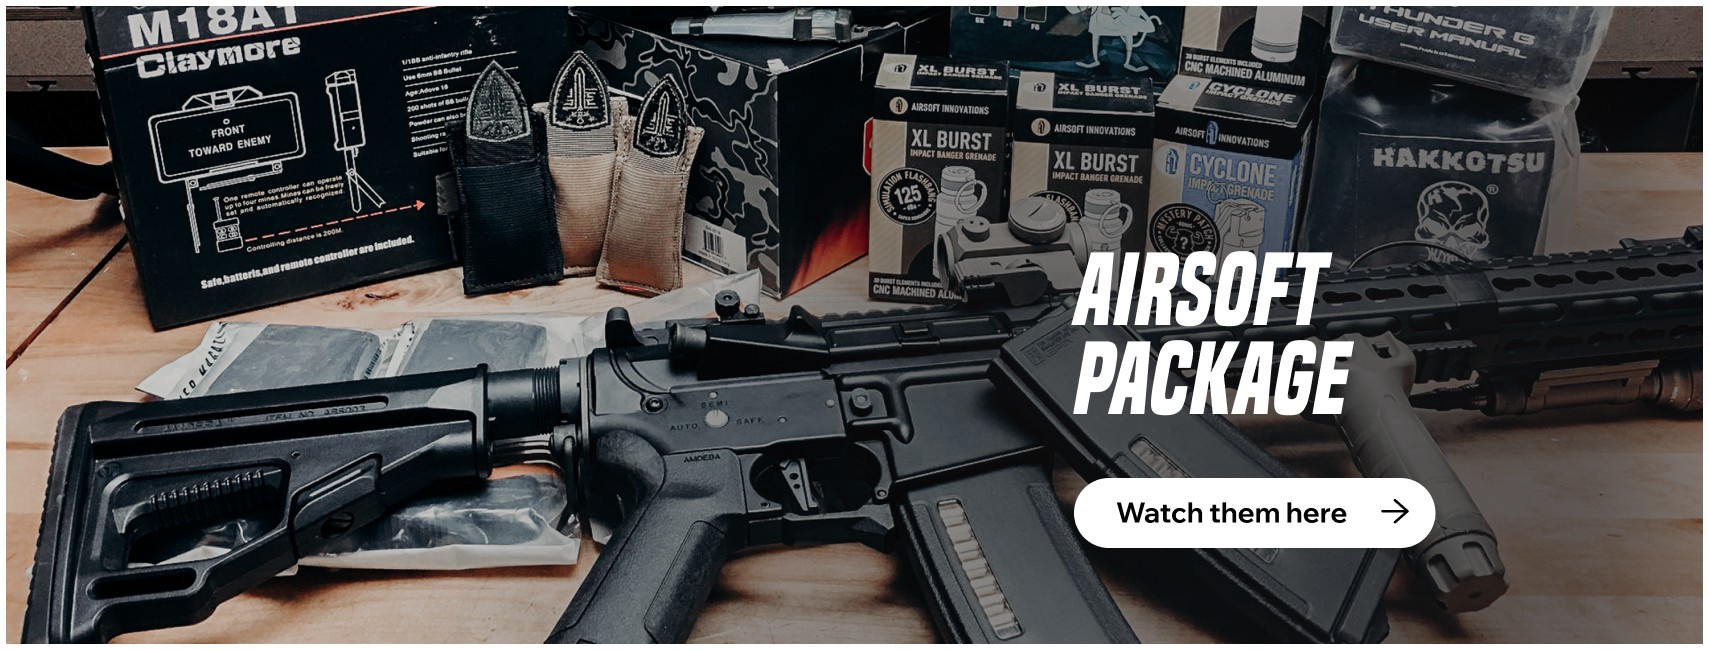 Airsoft Package